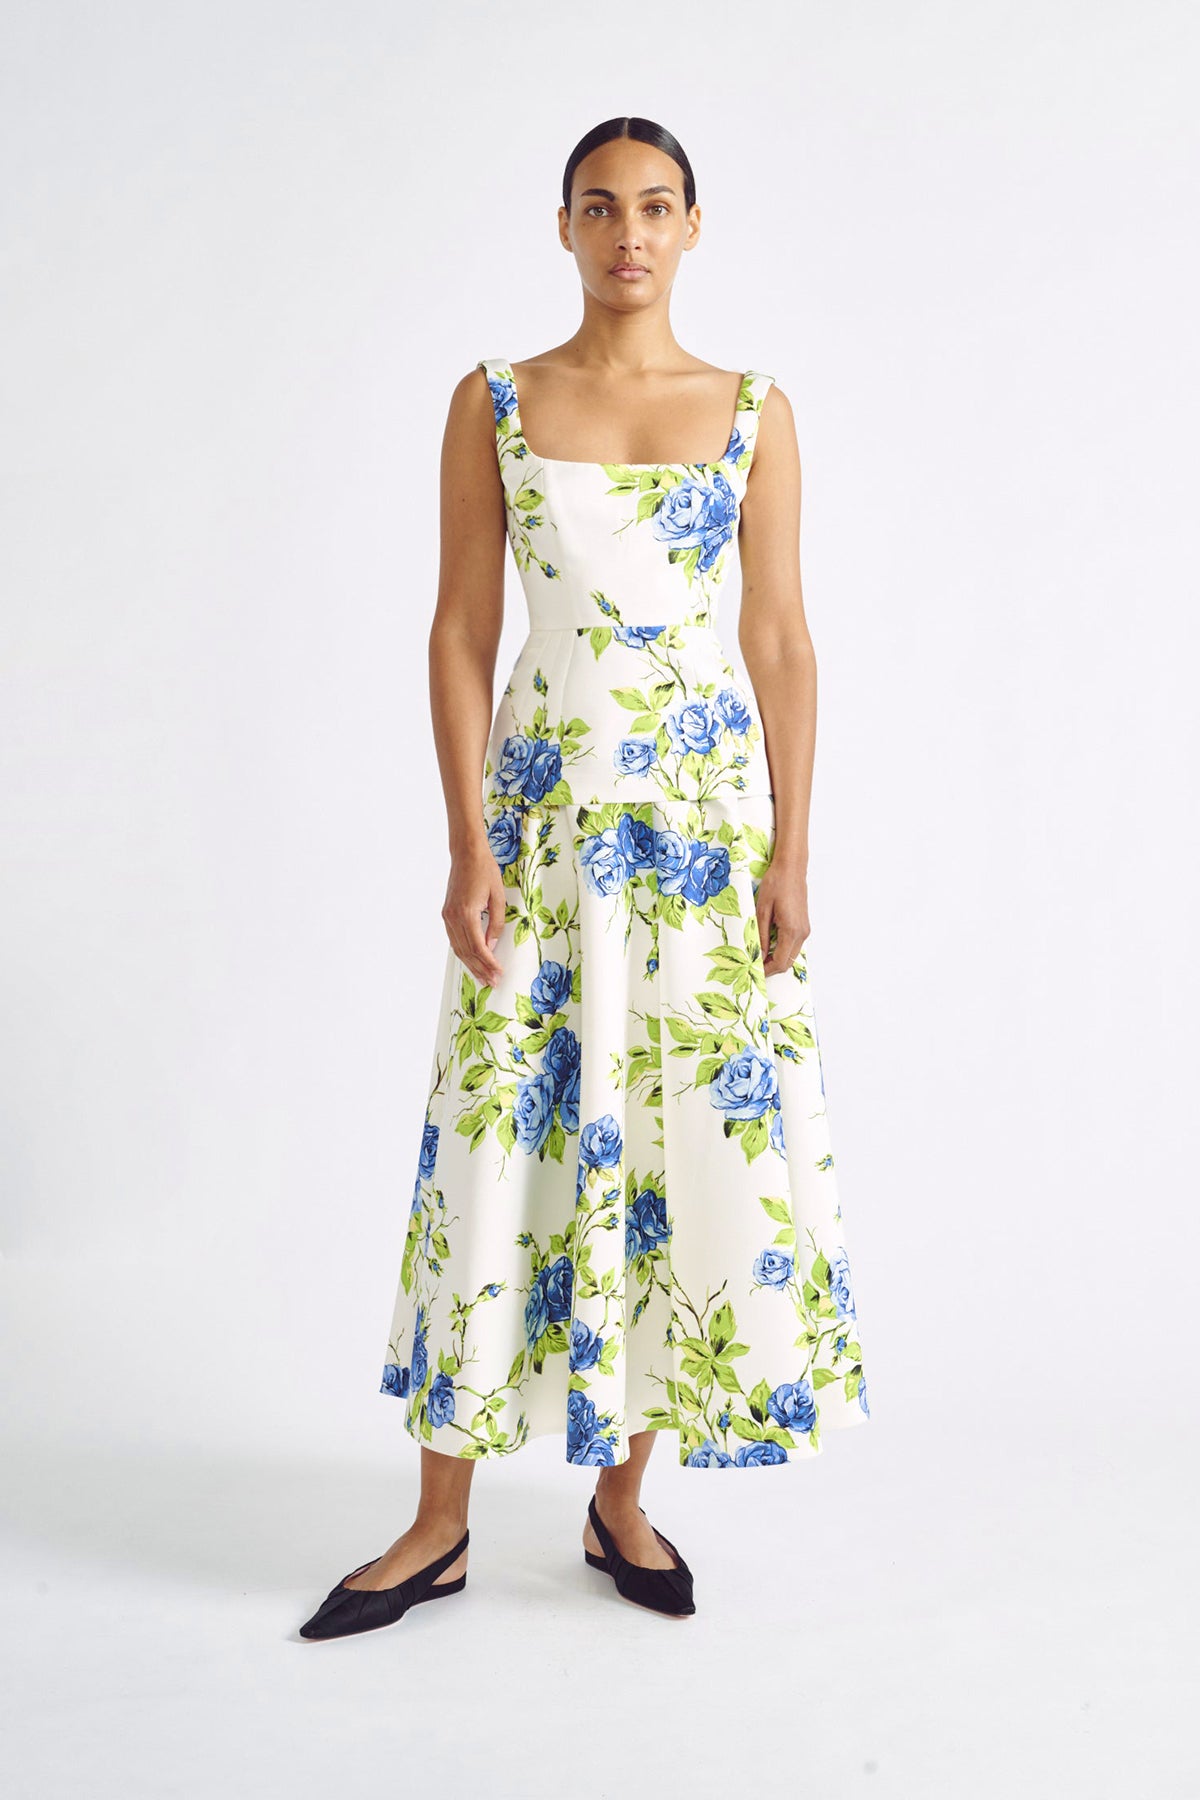 Yolette Top | Floral Printed Sleeveless Top in Tafetta Faille | Emilia Wickstead